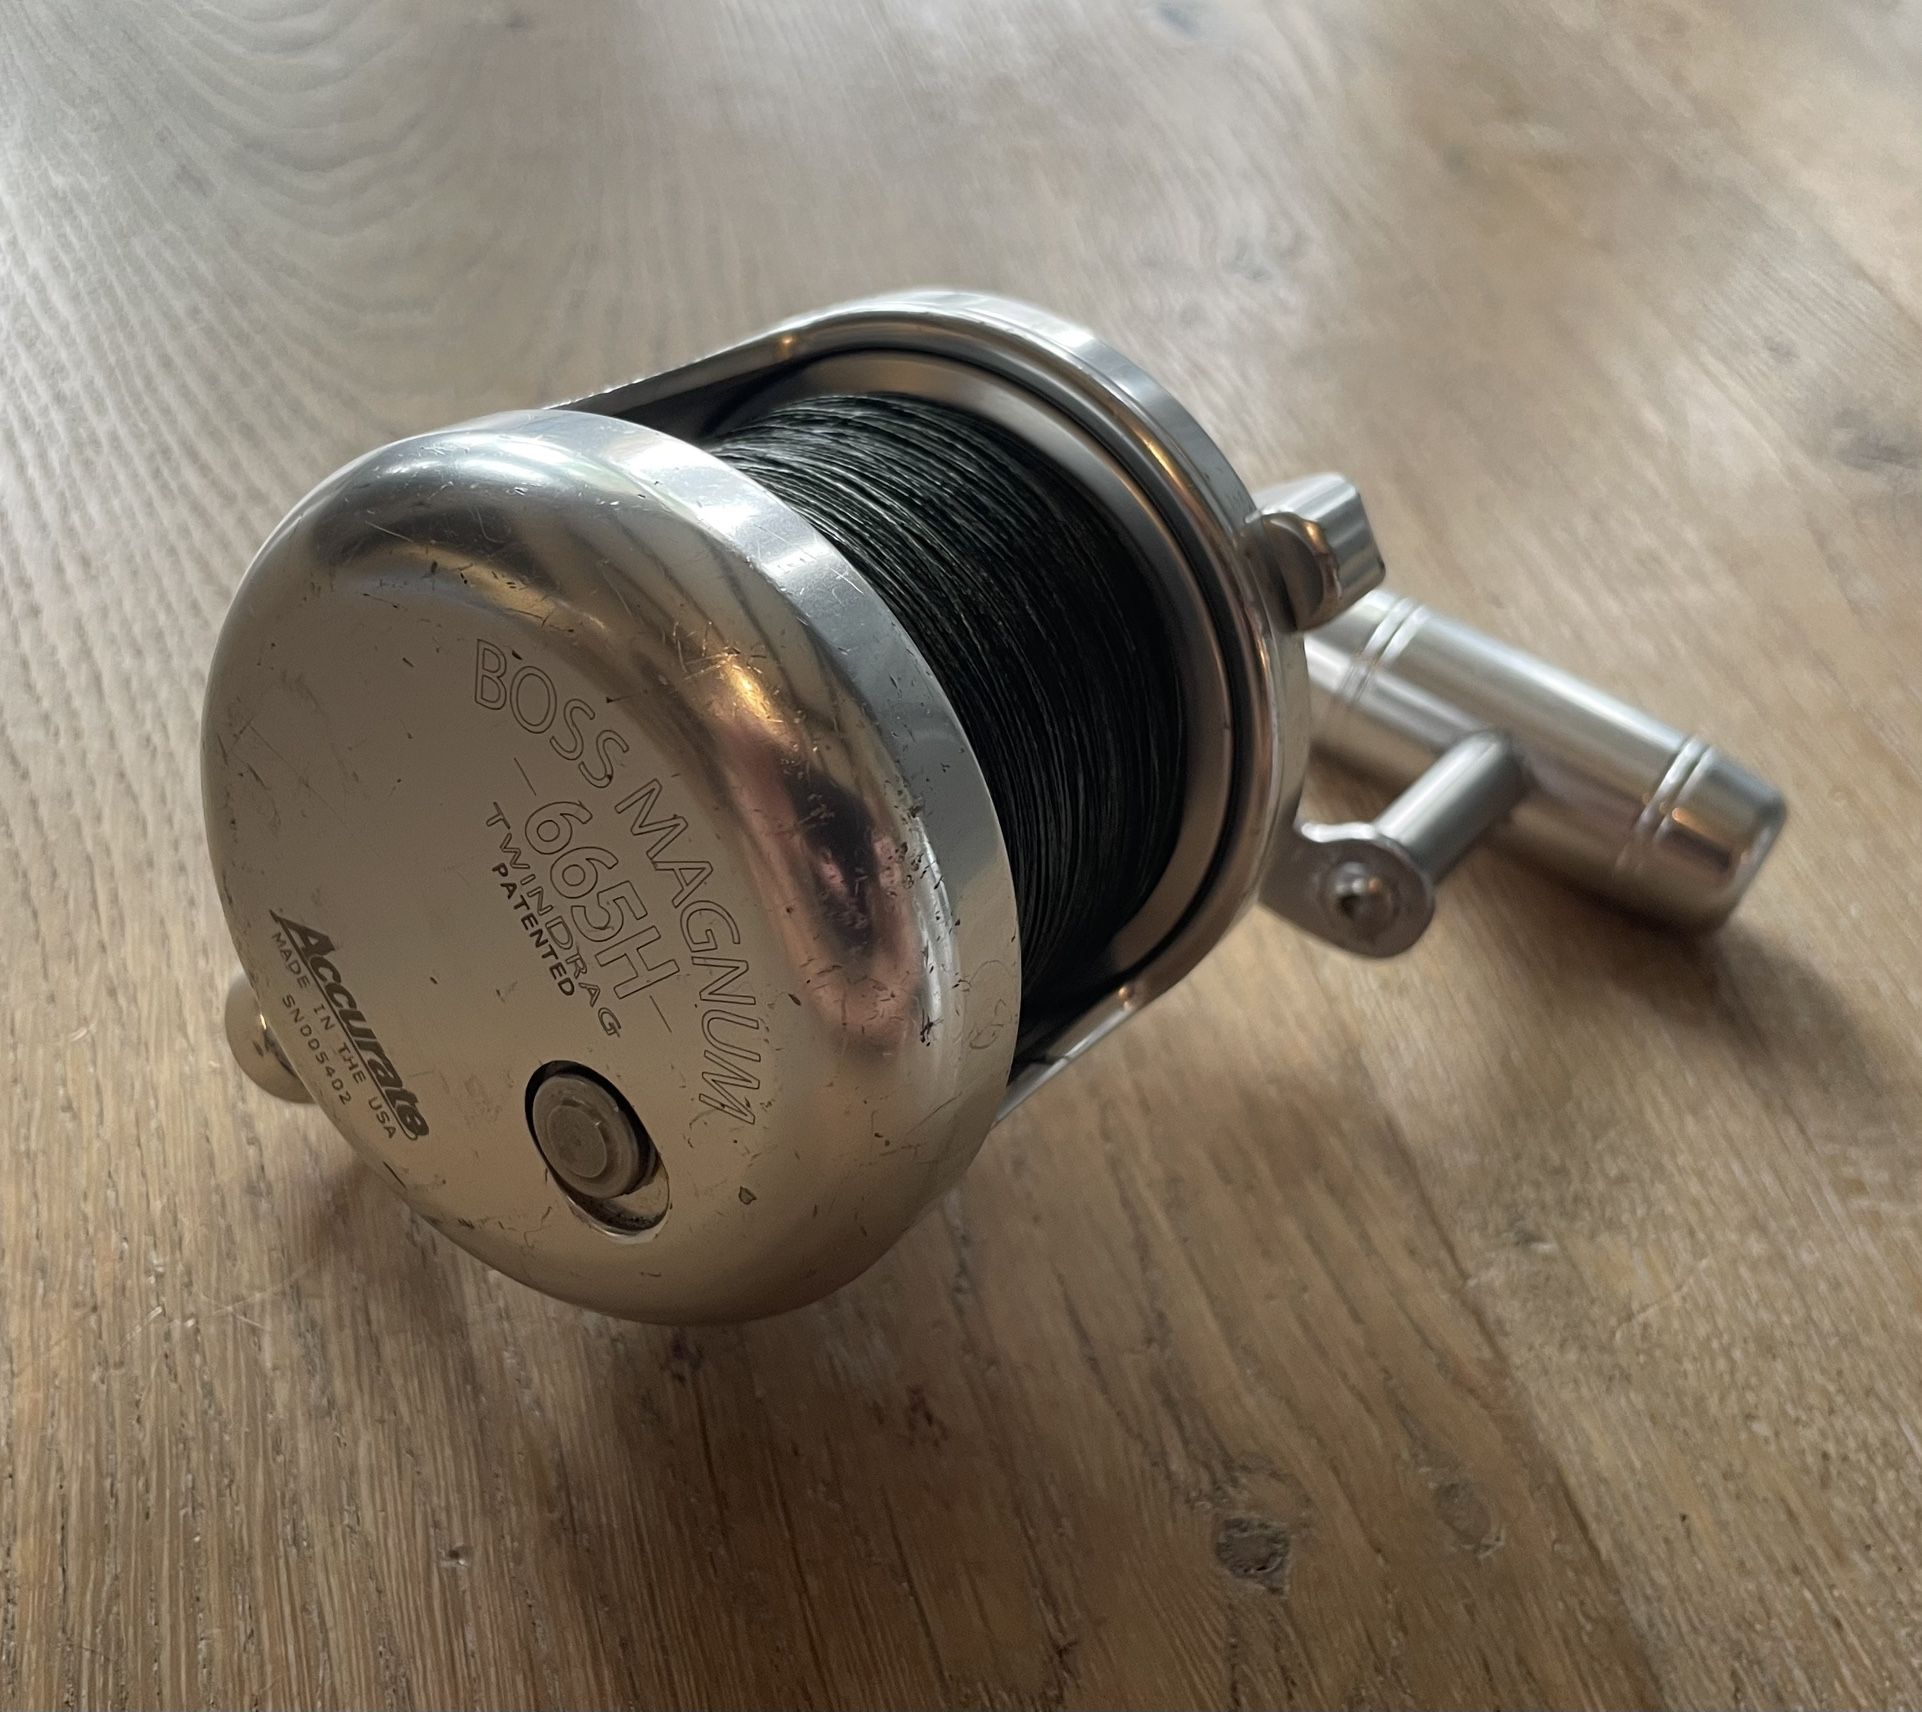 Accurate Boss Magnum 665H Fishing Reel for Sale in Oceanside, CA - OfferUp